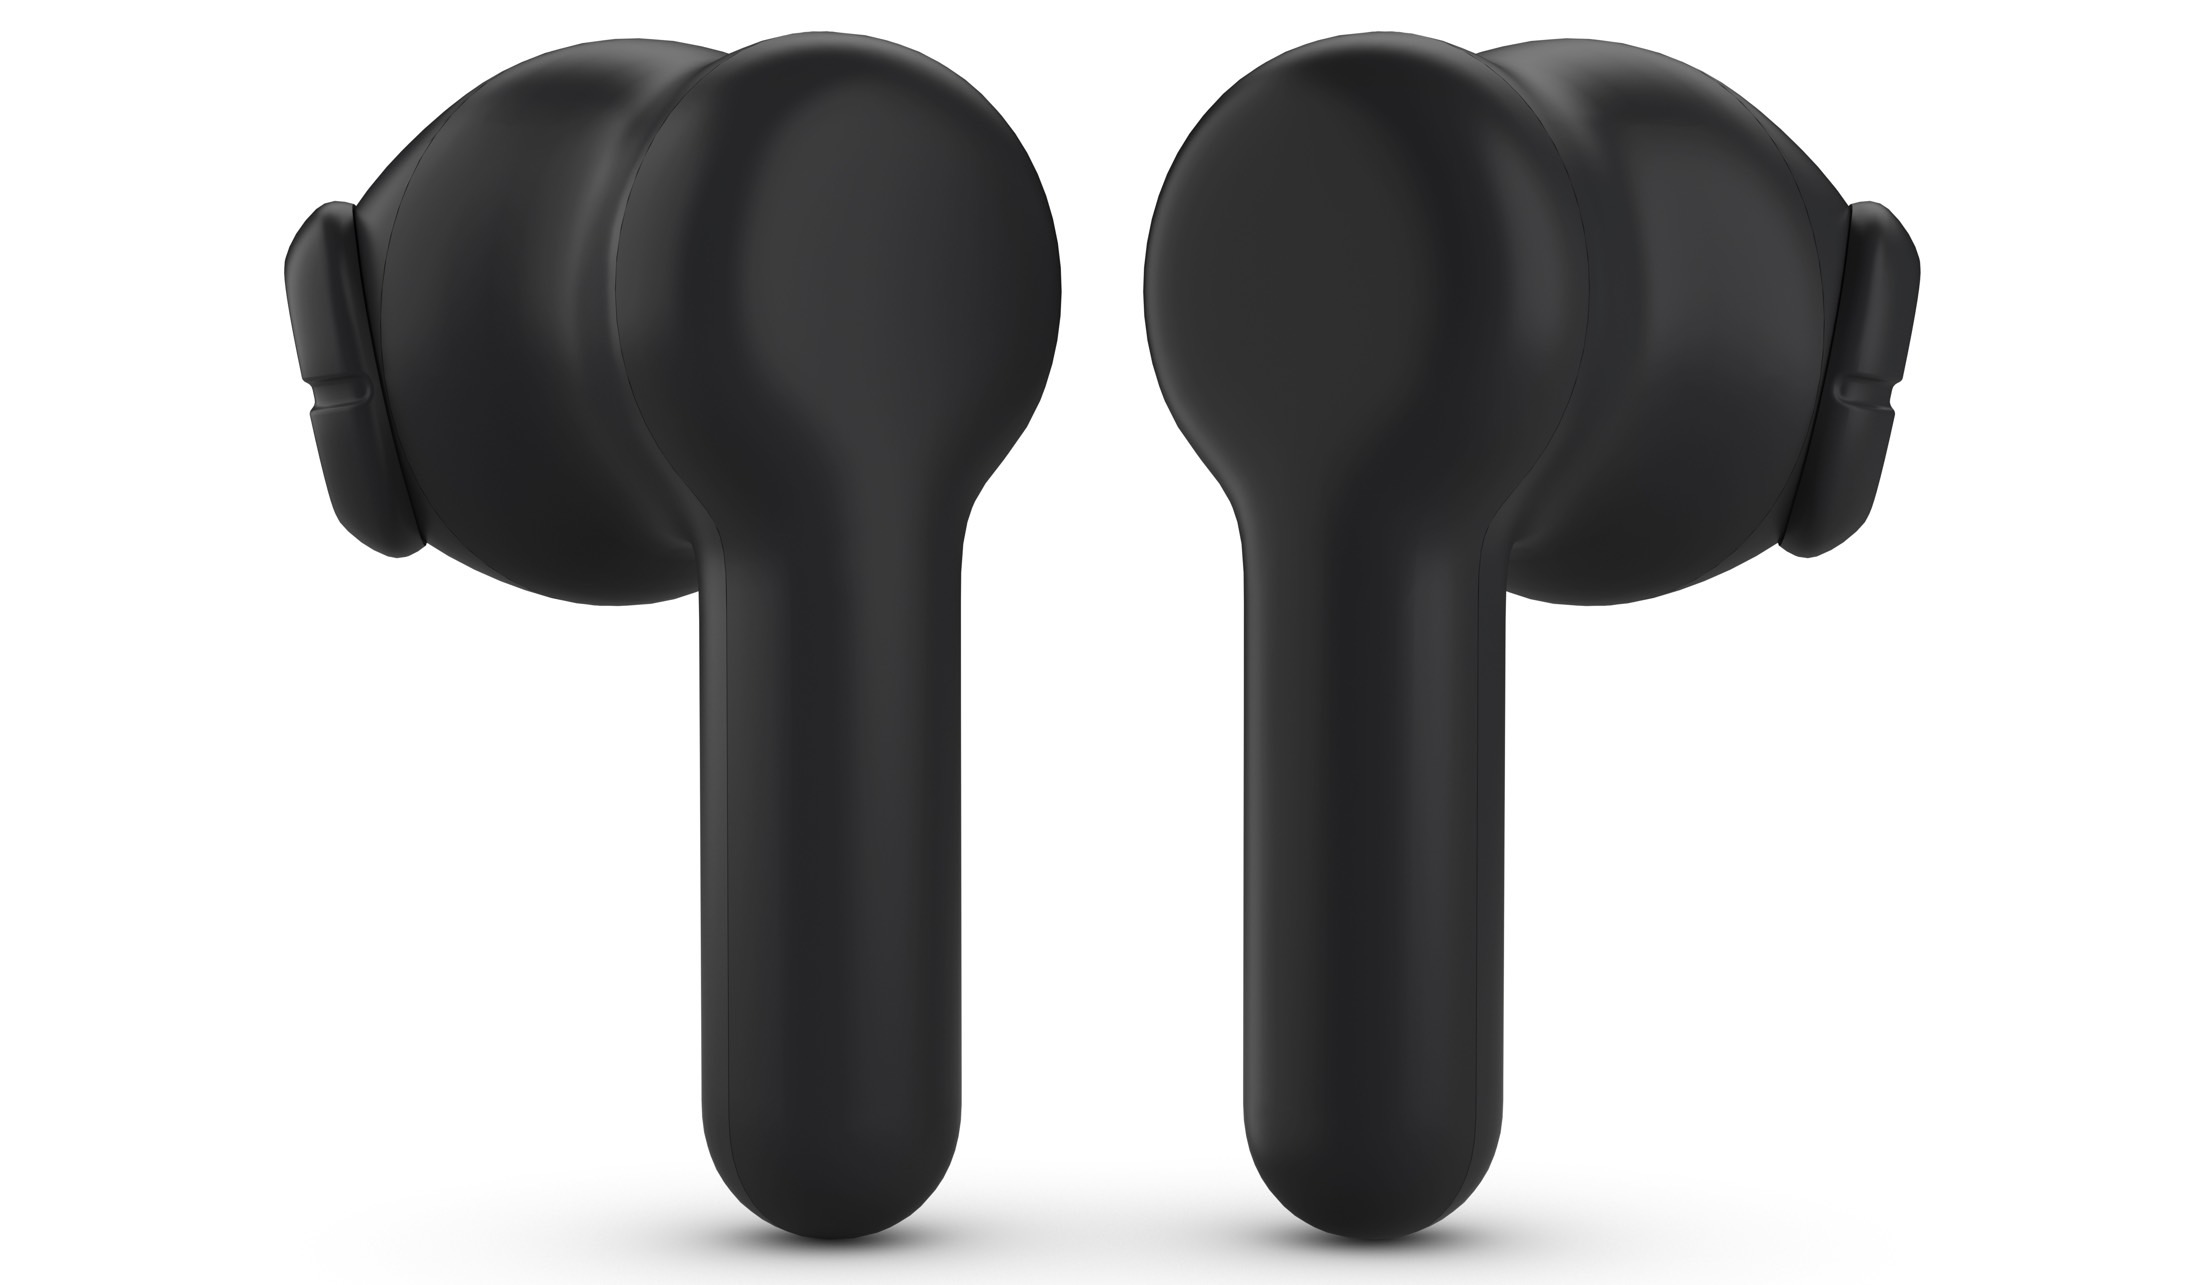 s new $50 Echo Buds take aim at Apple's AirPods